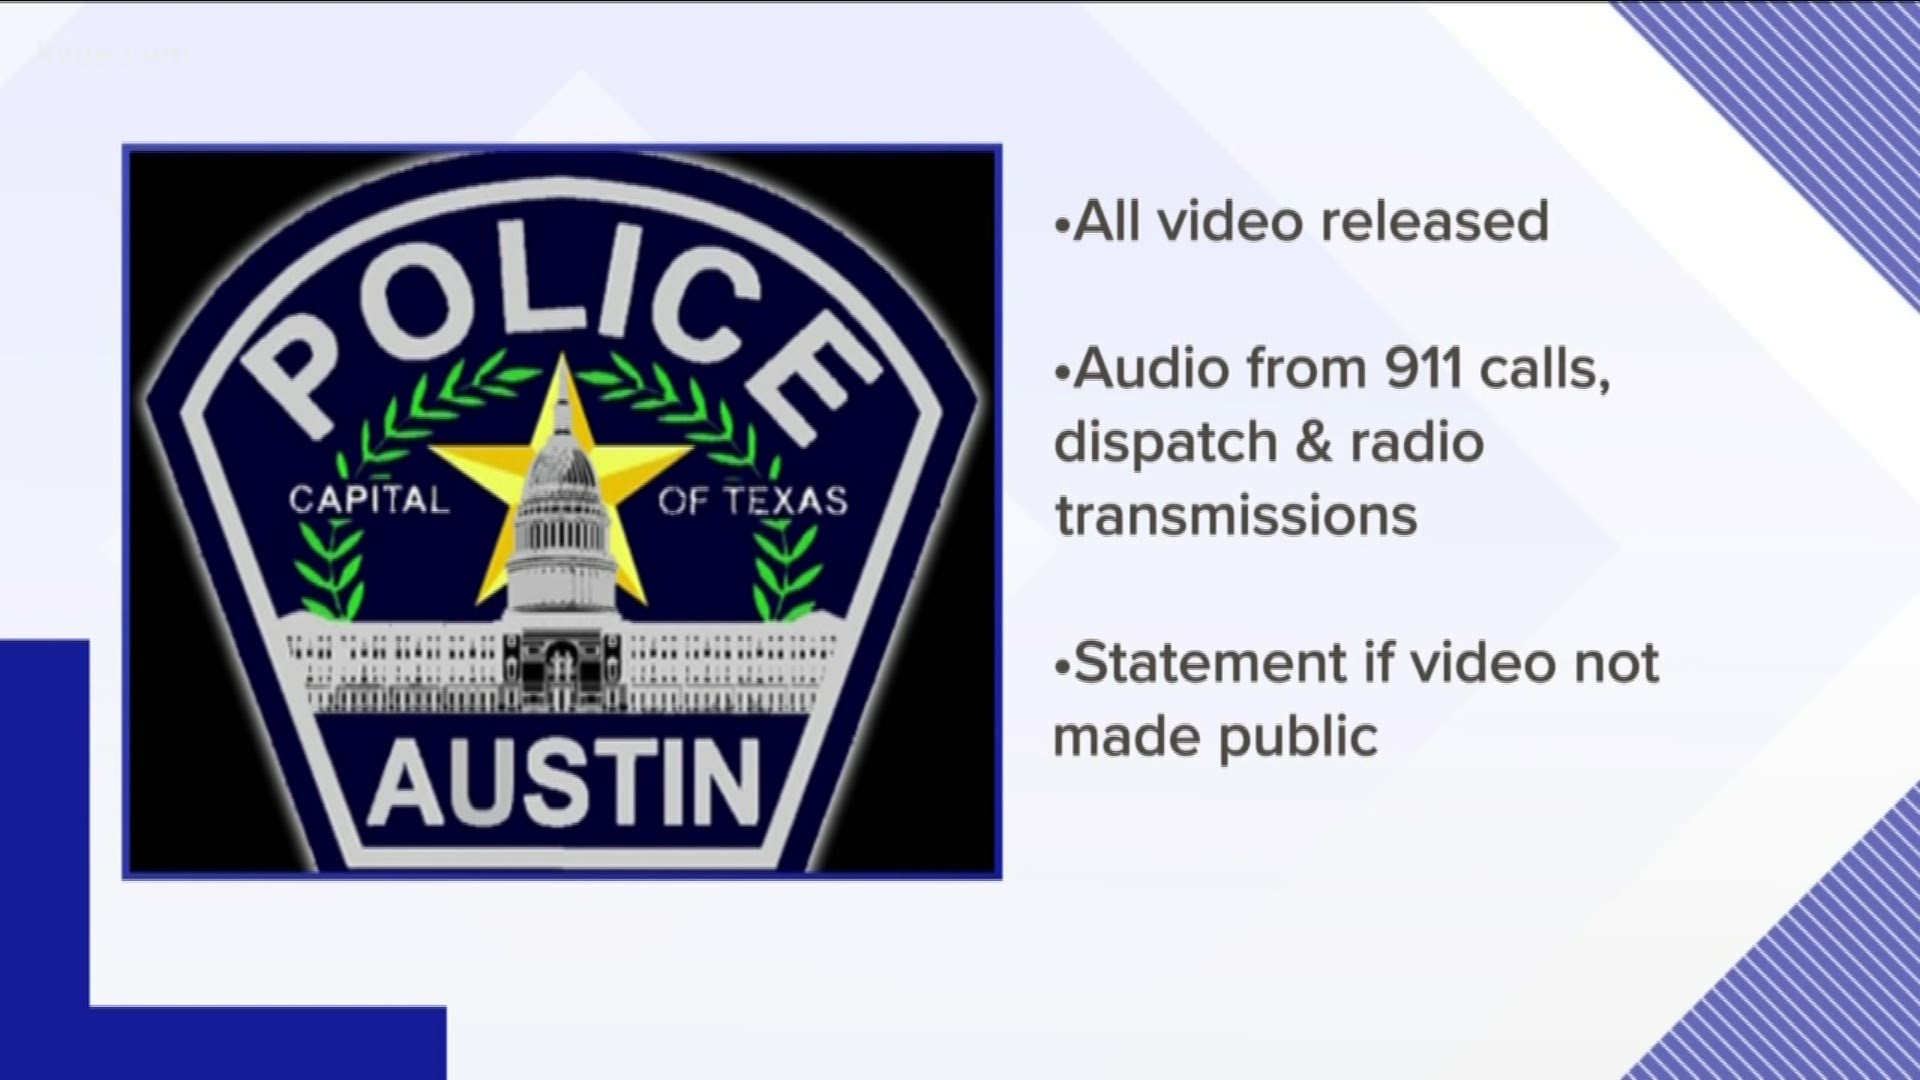 Austin police will now release video footage of officer-involved shootings within two months of them happening.